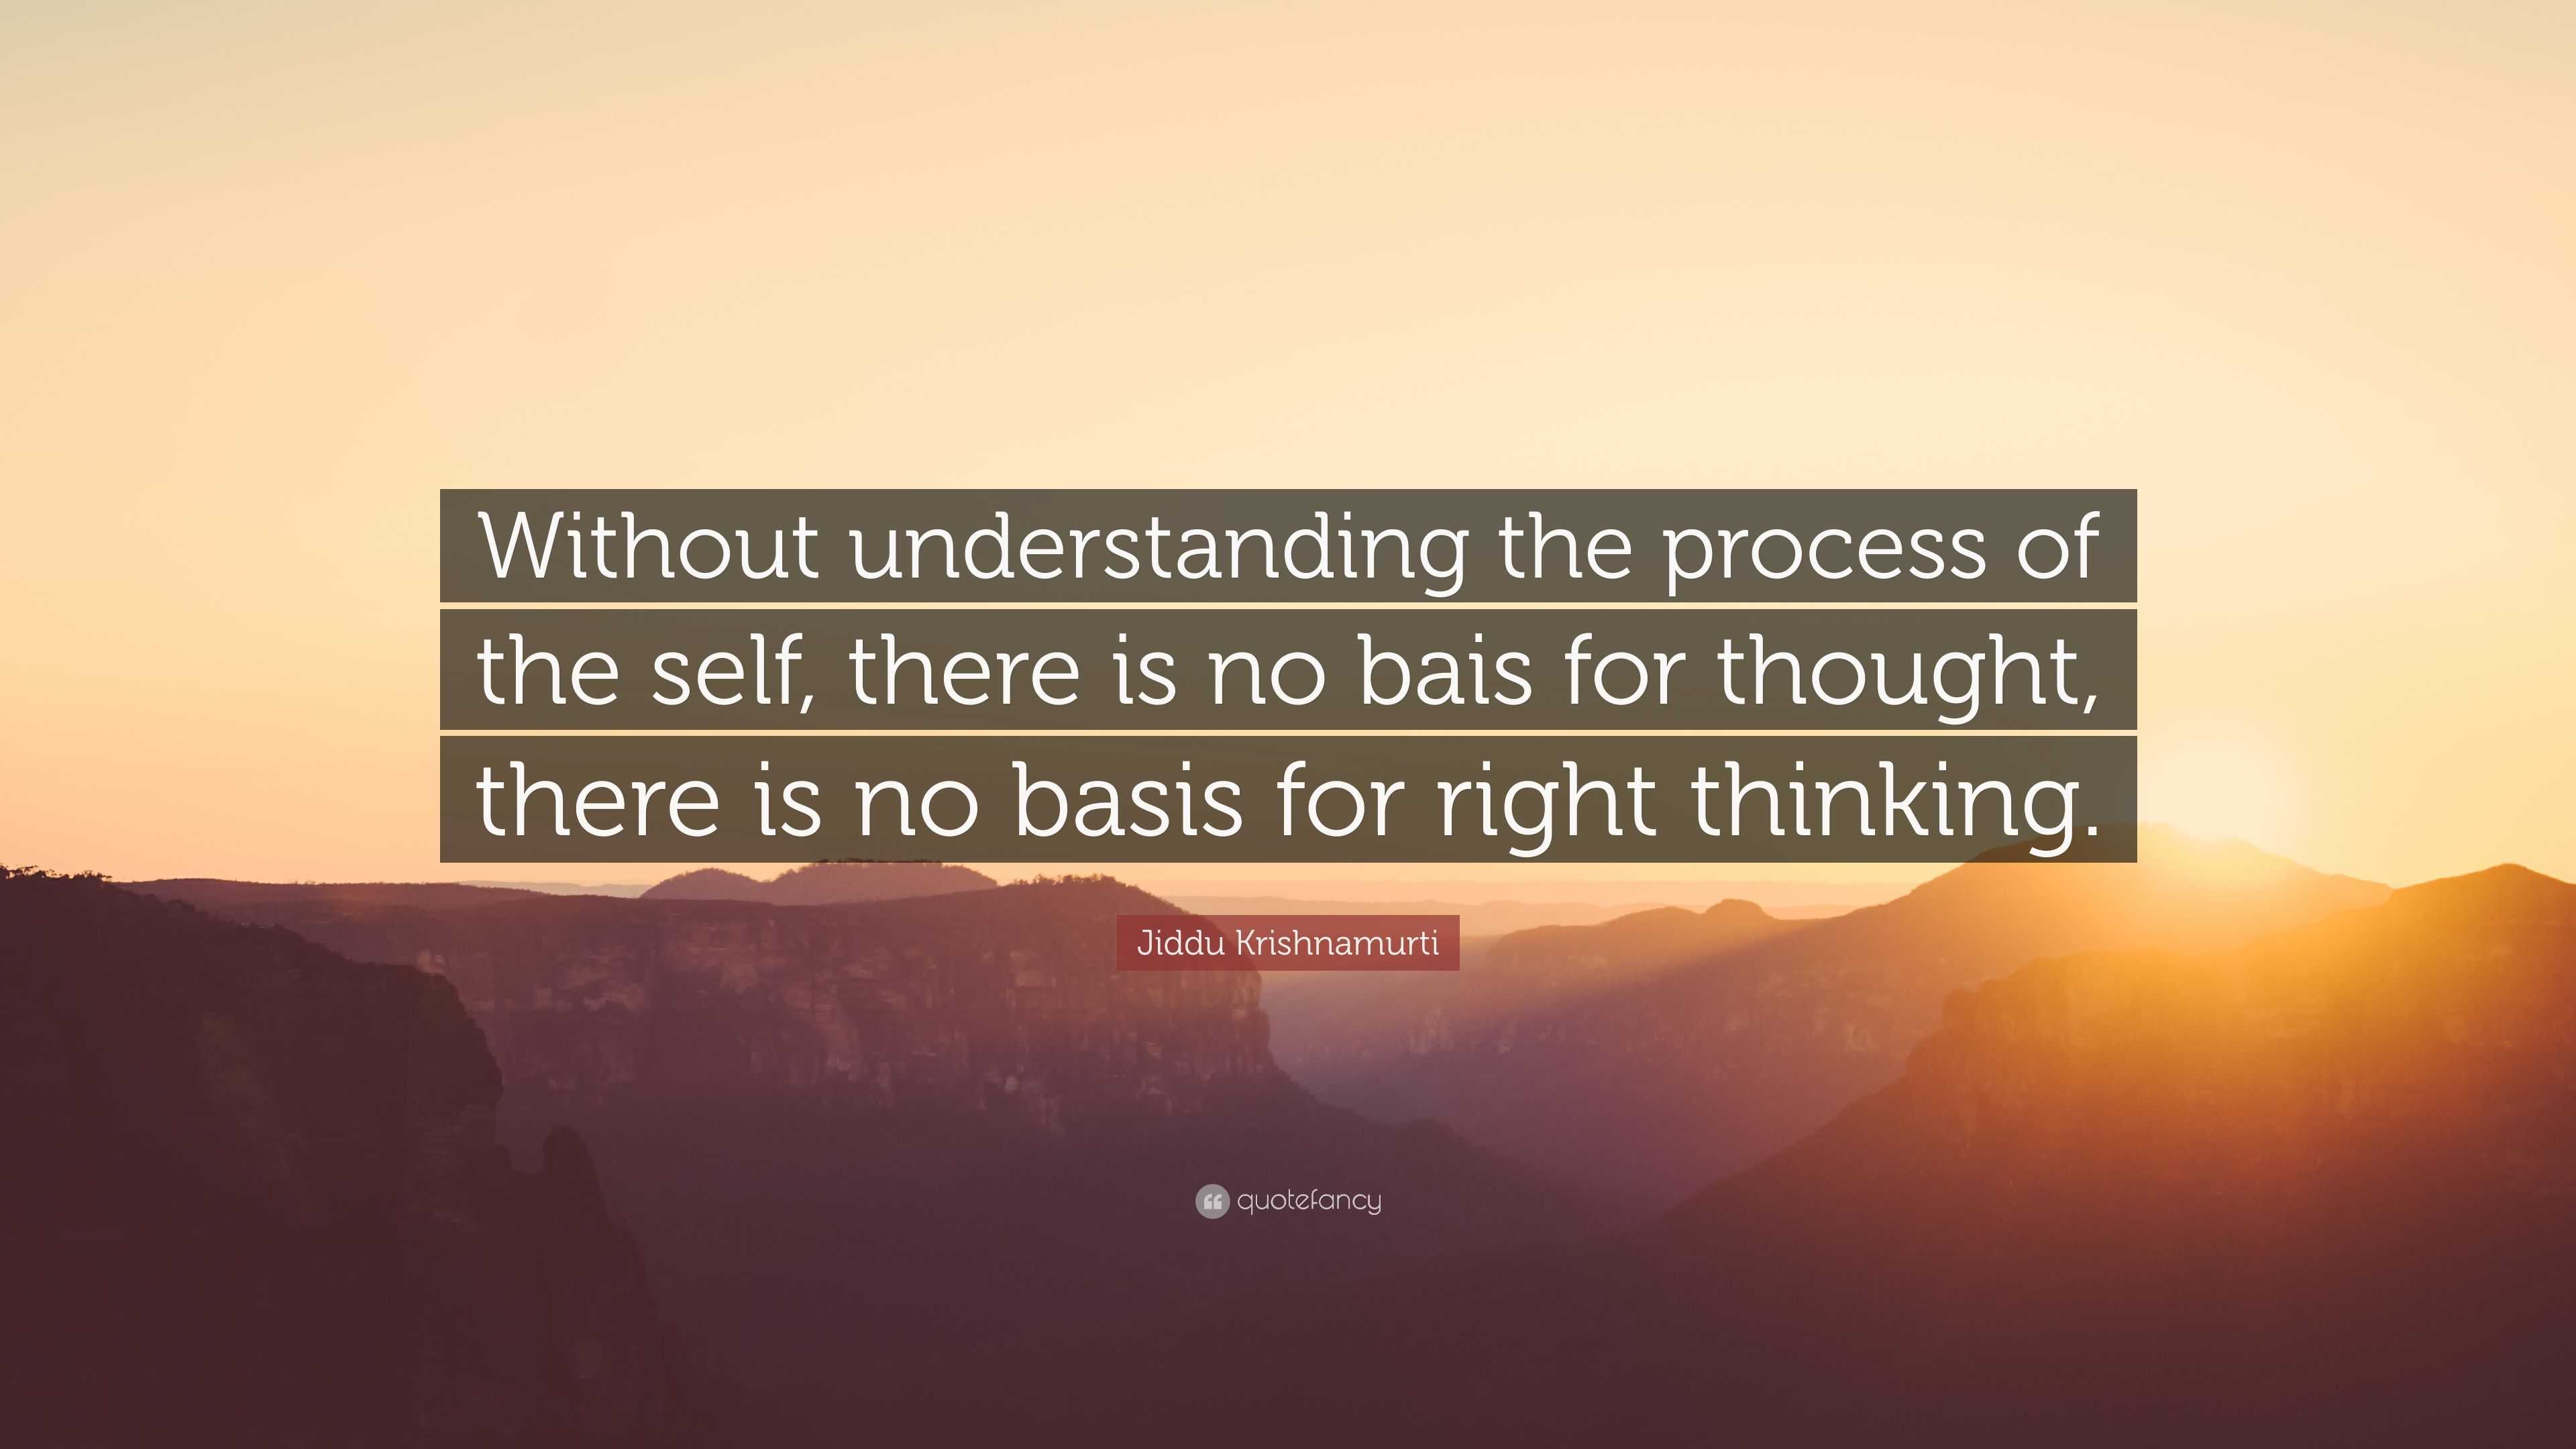 Jiddu Krishnamurti Quote: “Without understanding the process of the ...